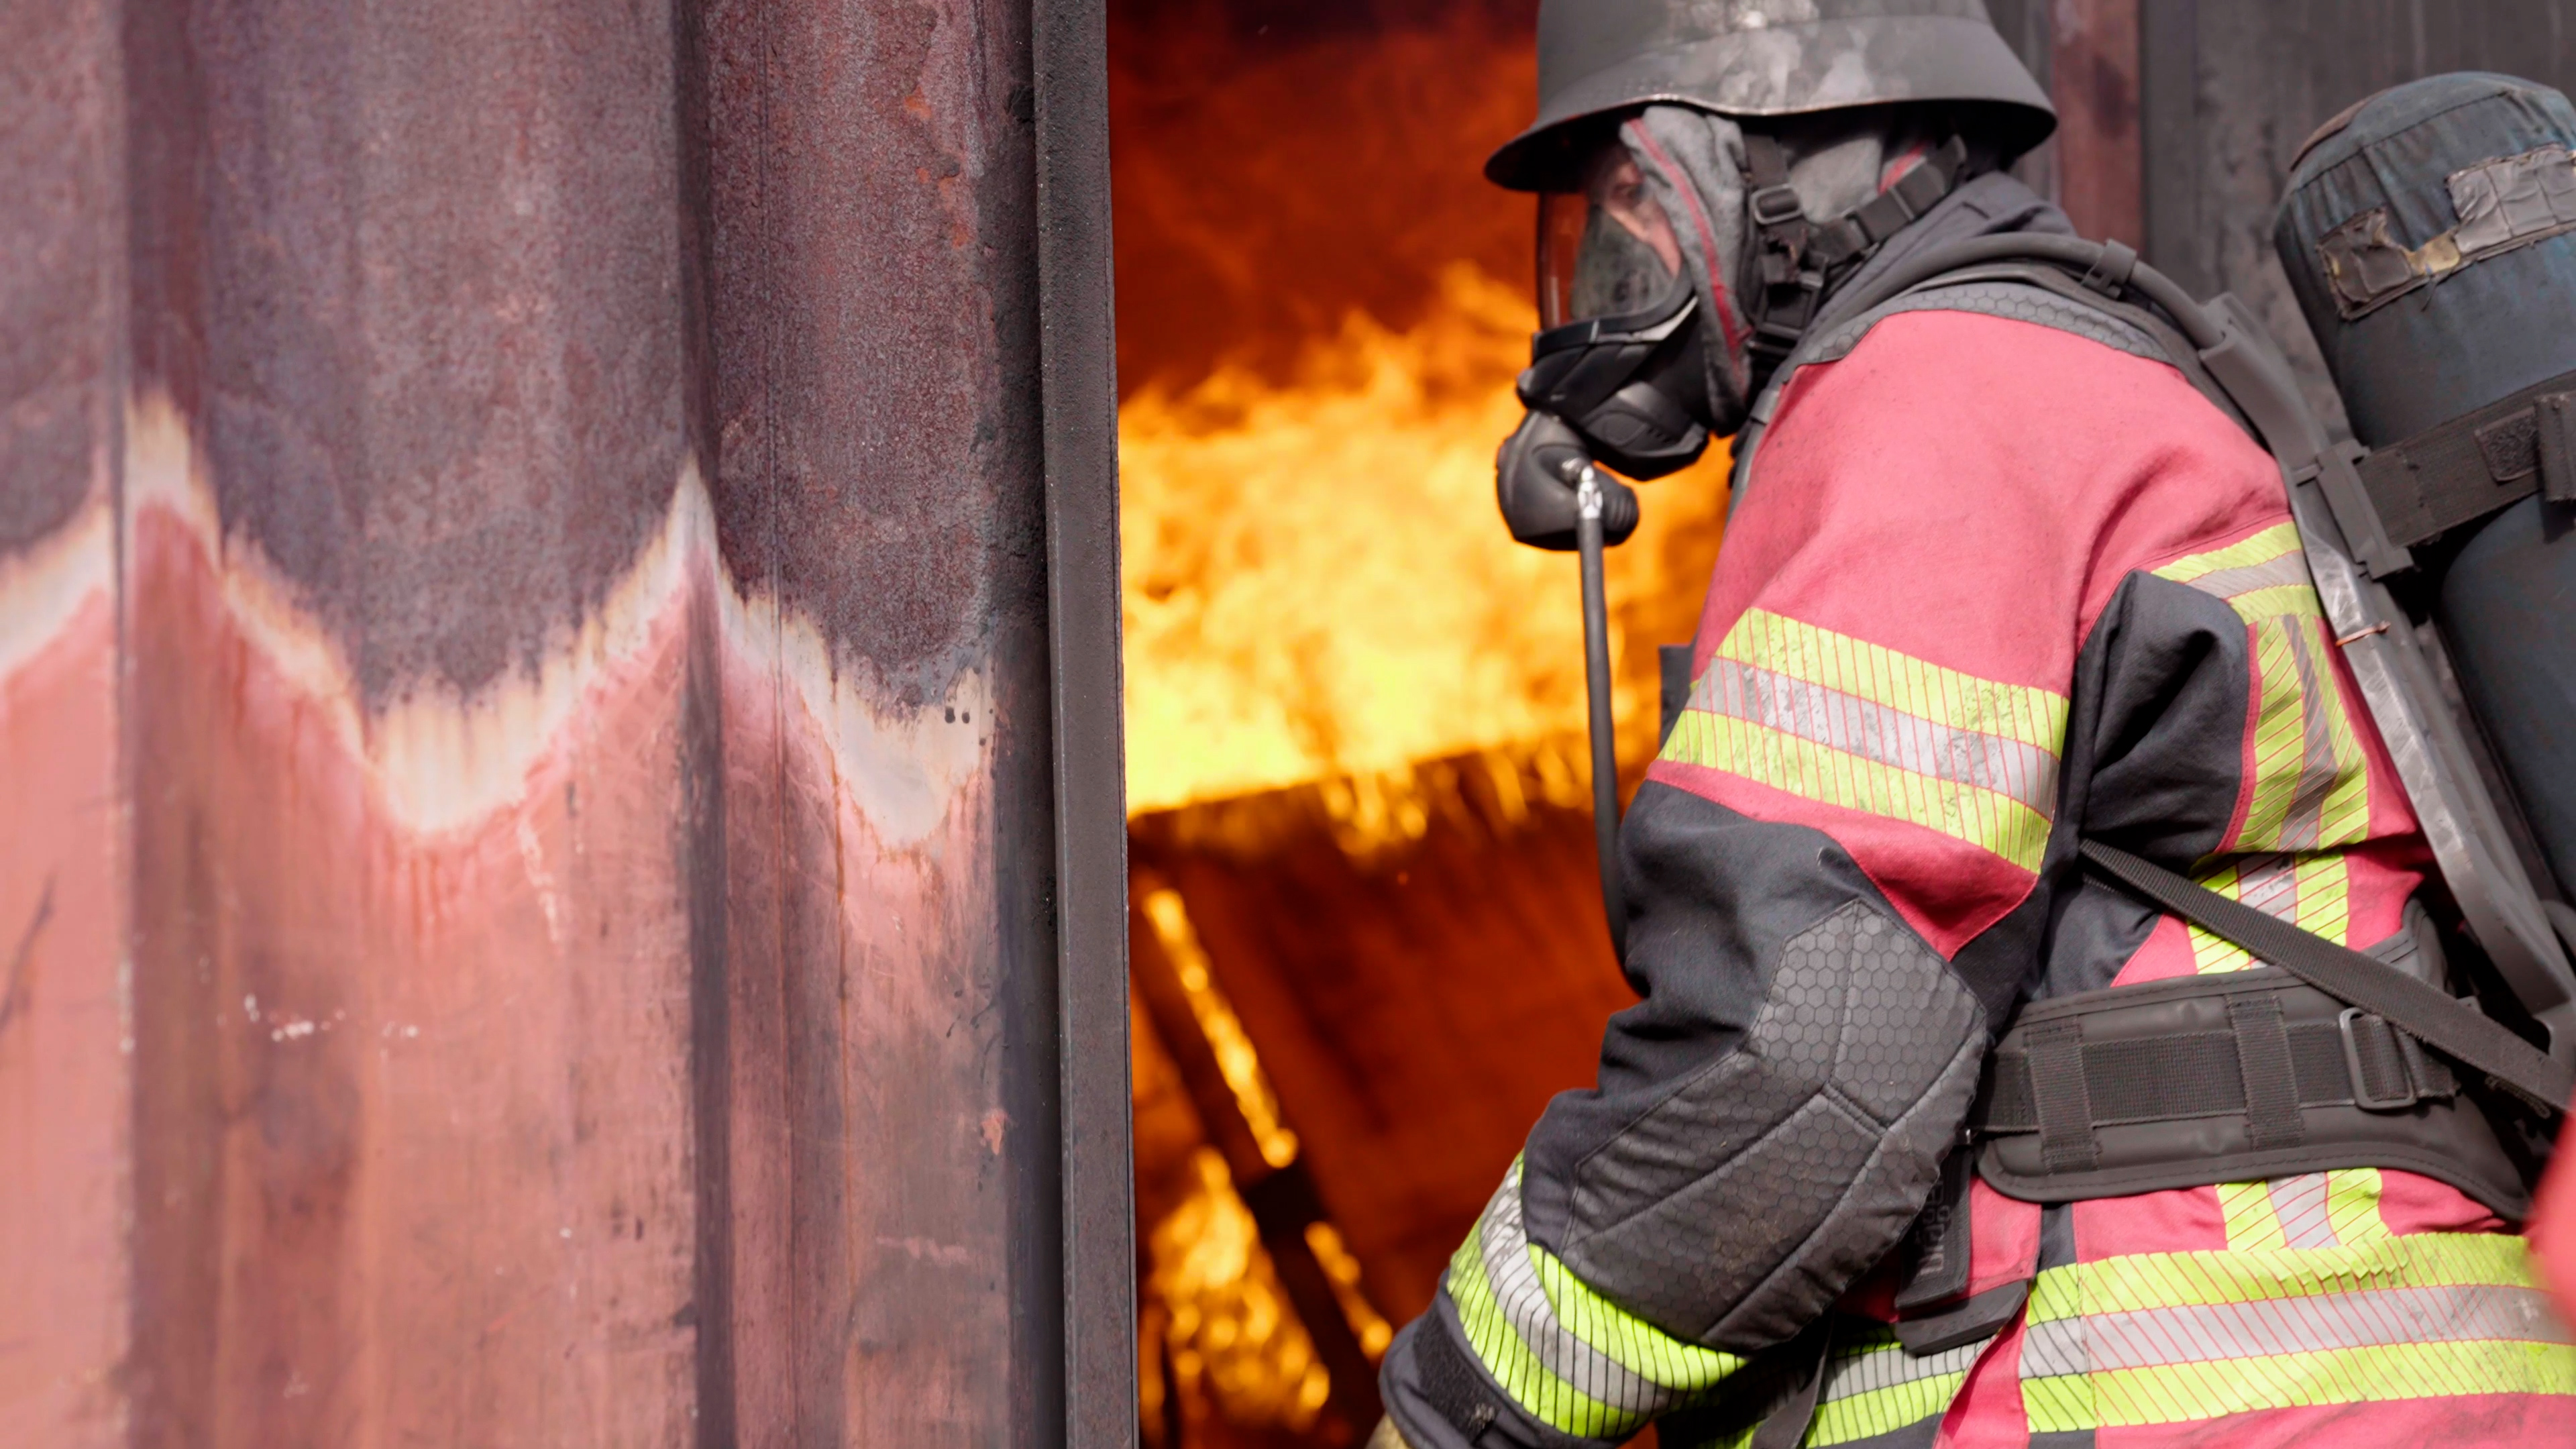 The project partners in “3D-PAKtex” set themselves the goal of better-protecting firefighters from the risks posed by PAH toxins by developing new types of protective suits.